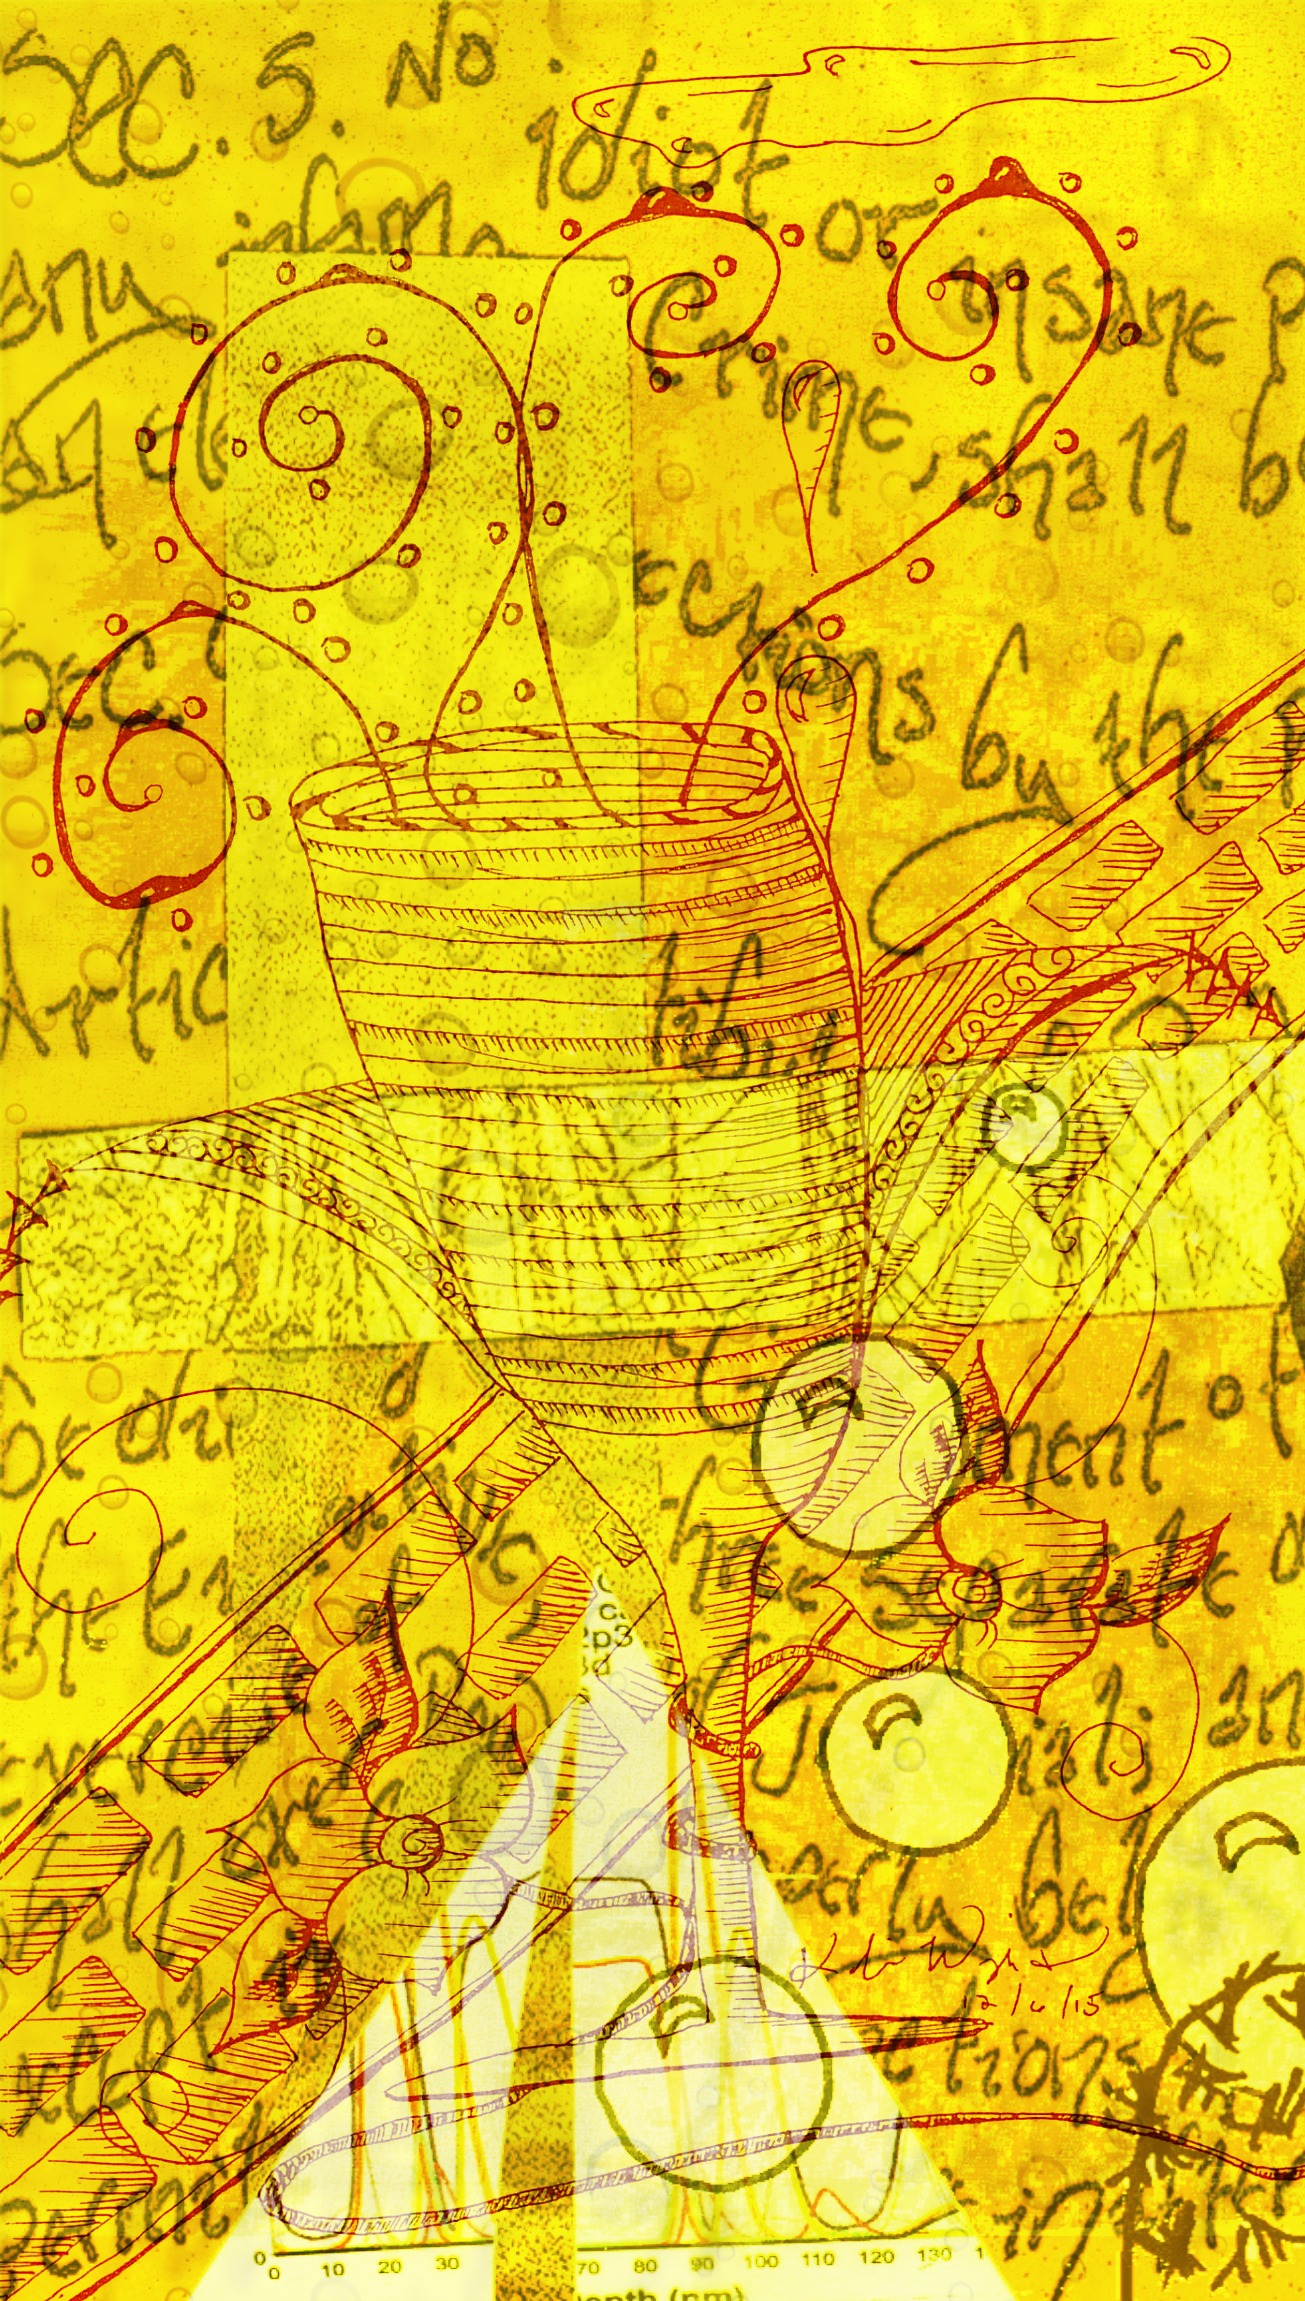 Abstract art with words on a bright yellow background by Kobina Wright